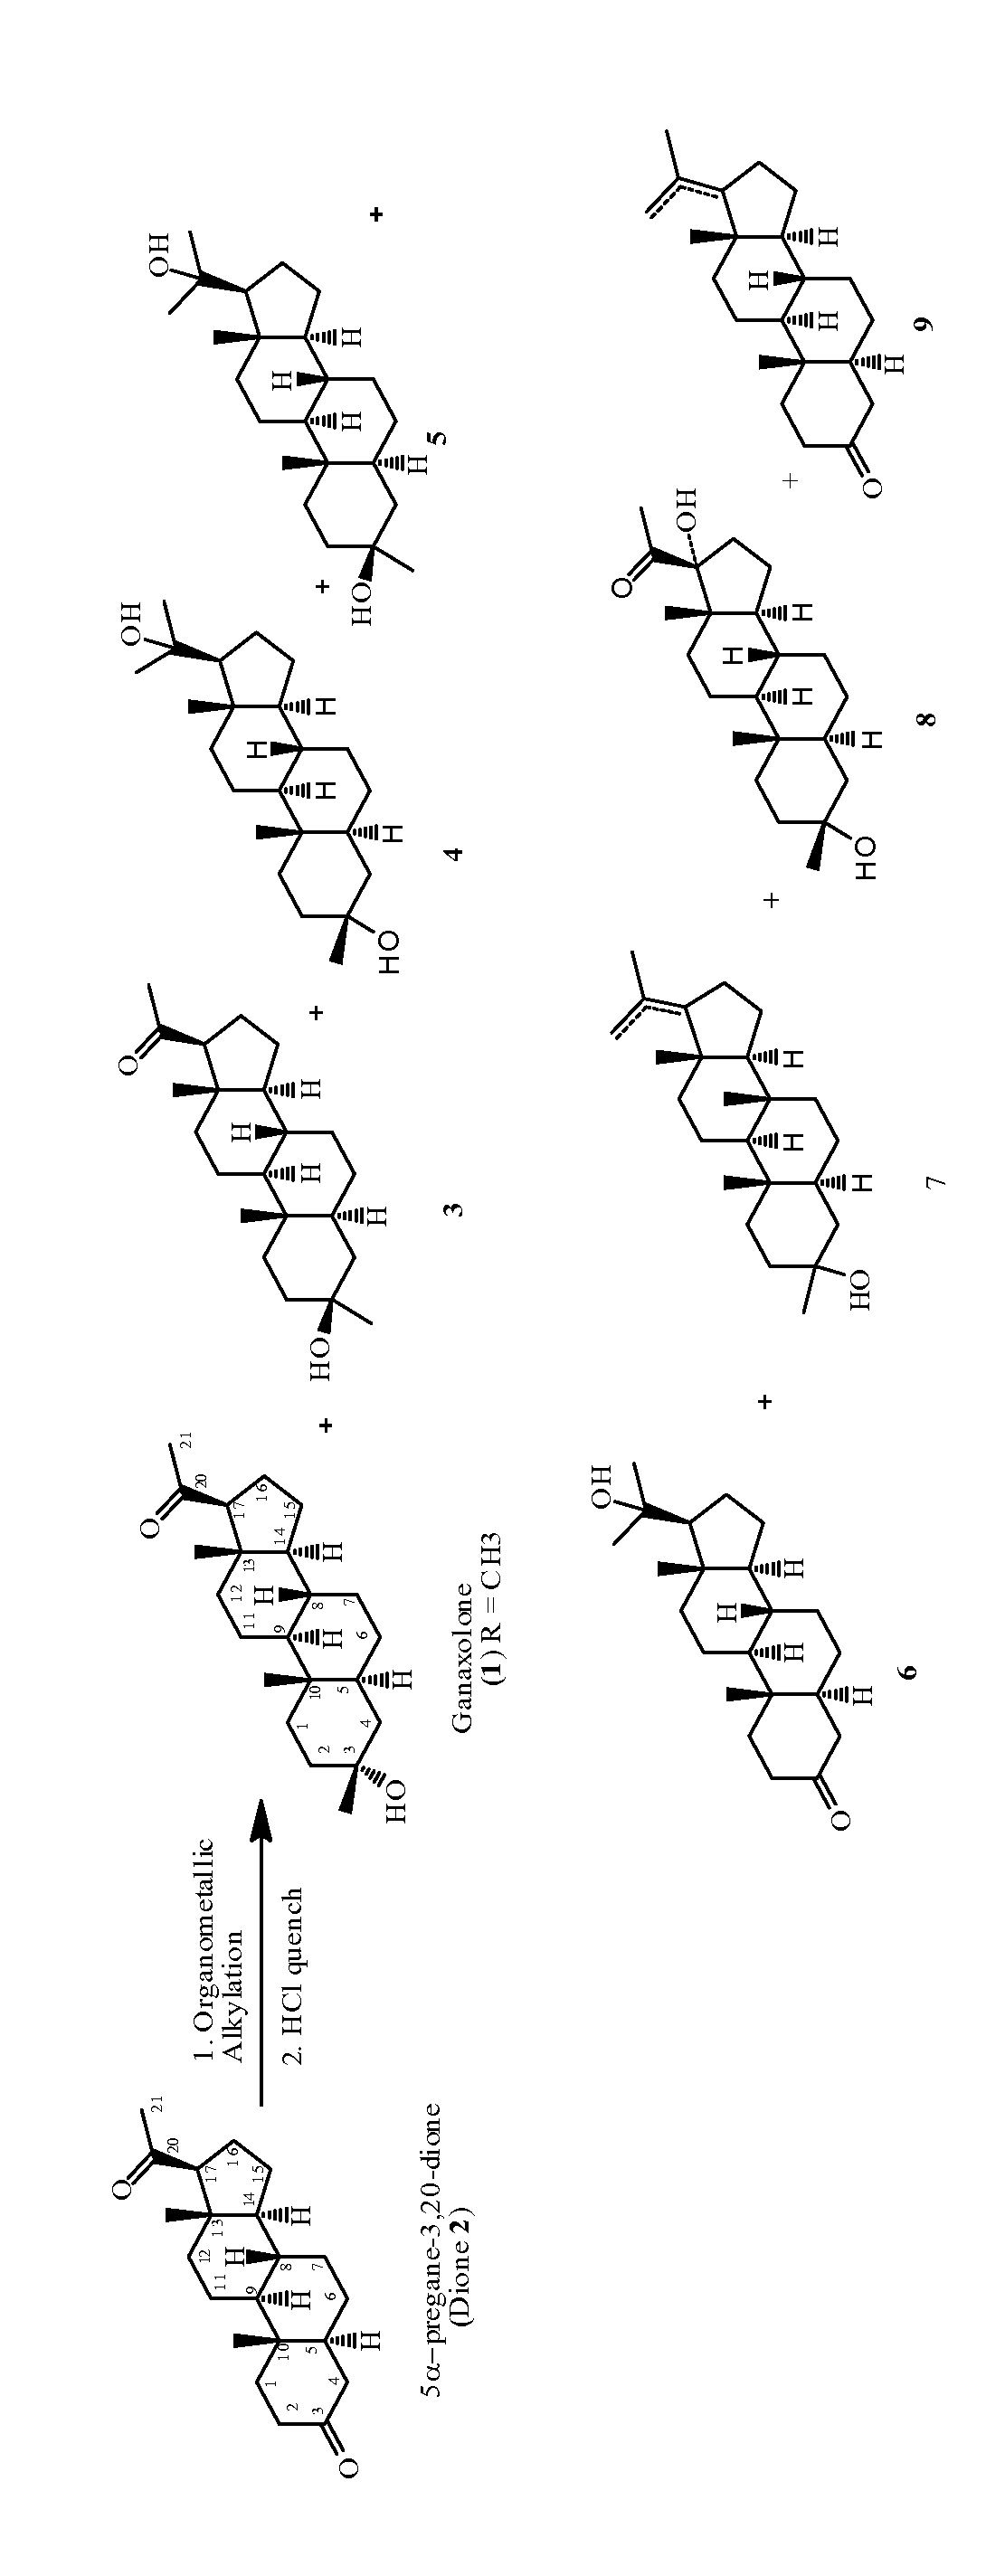 Method for making 3α-hydroxy, 3β- substituted-5α-pregnan-20-ones